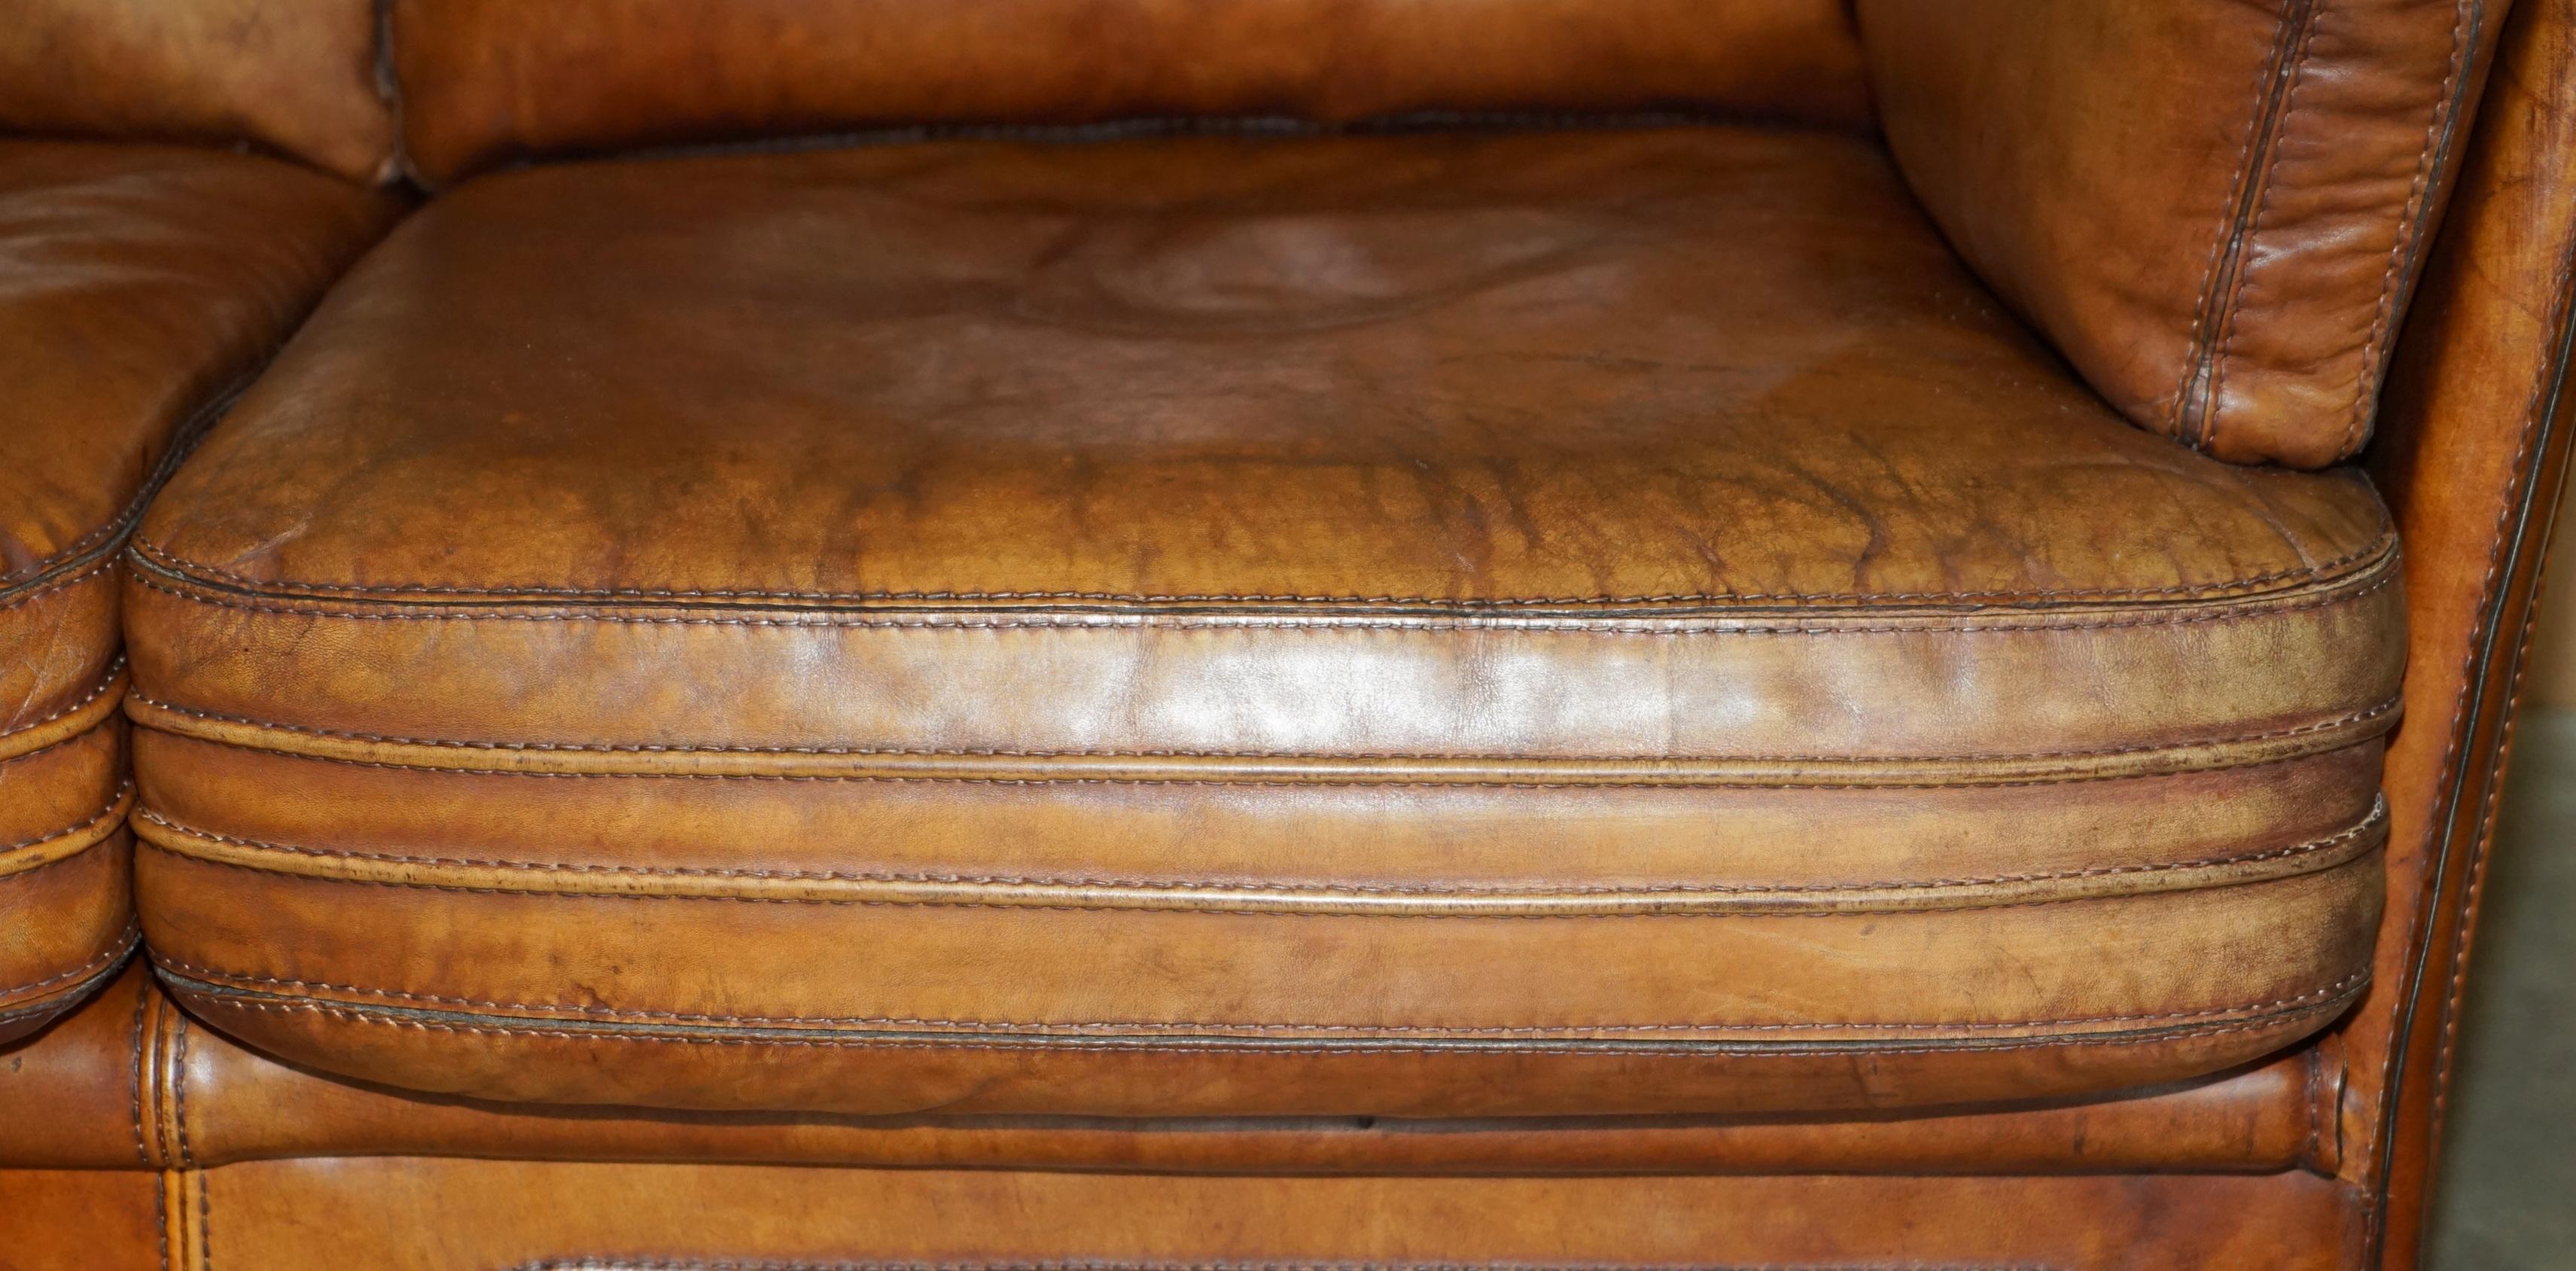 ViNTAGE BROWN LEATHER ROCHE BOBOIS MID CENTURY MODERN CONTEMPORARY SOFA For Sale 7